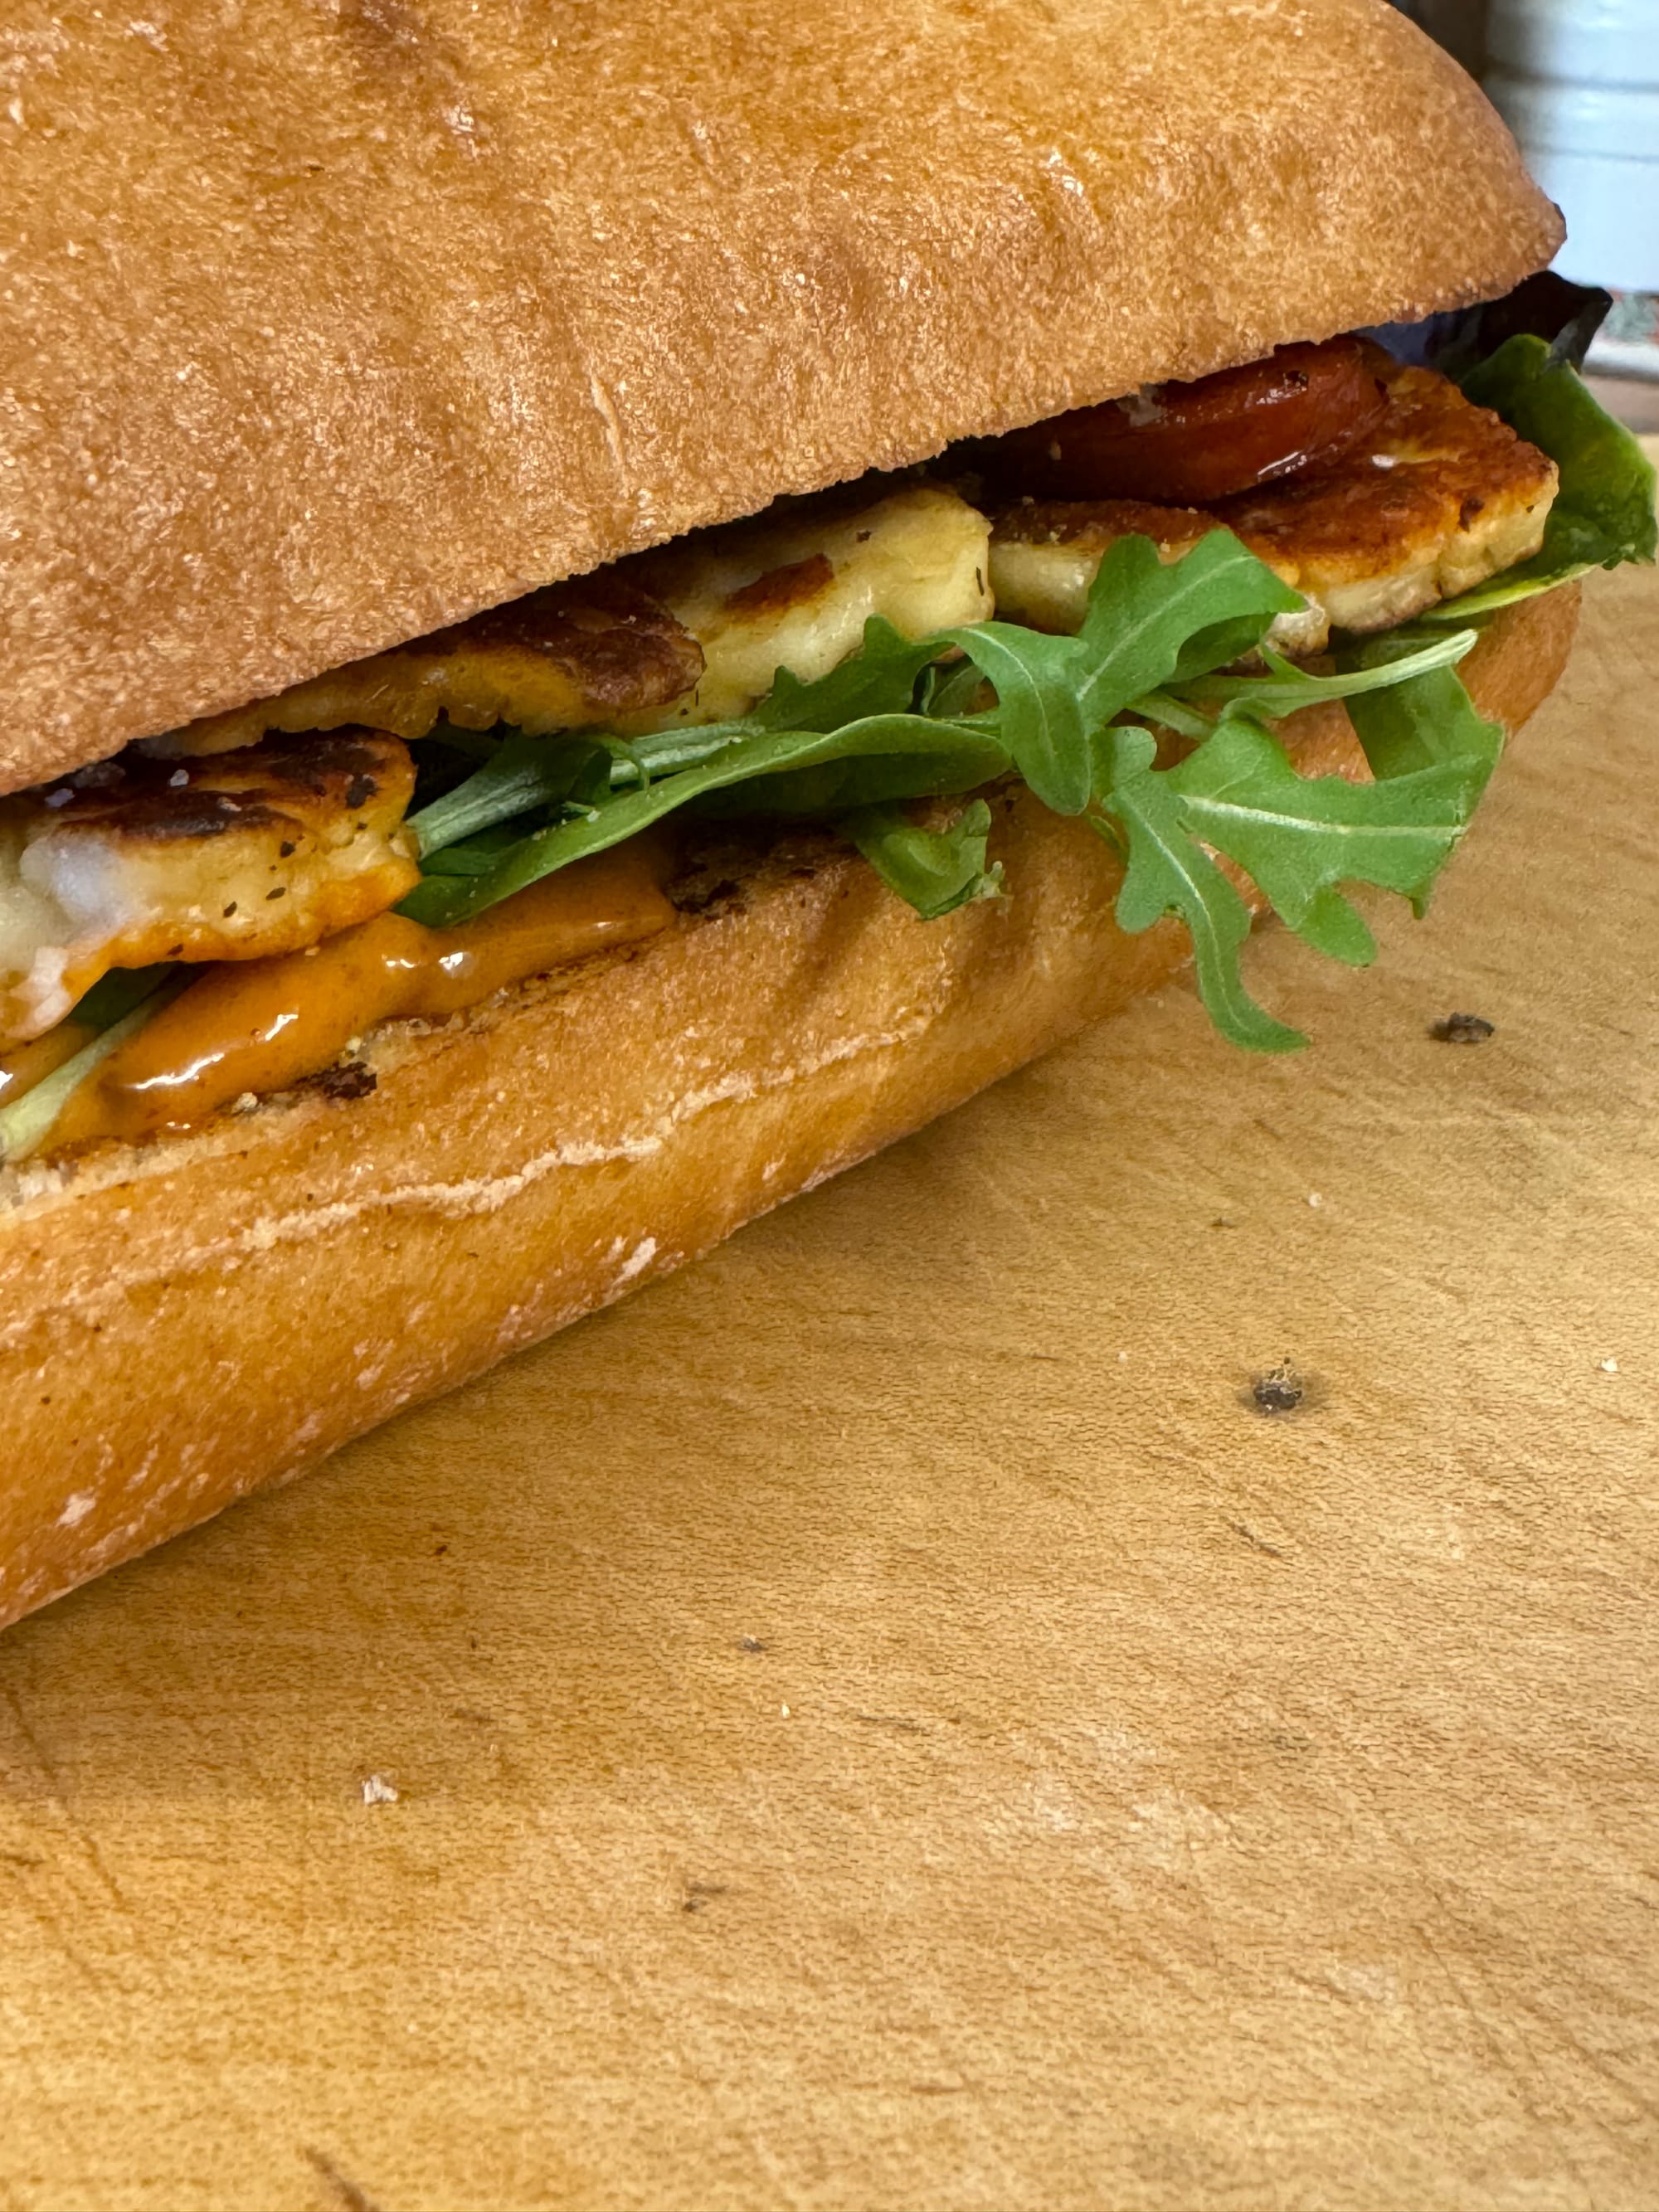 Tasty Chipotle Chorizo and Halloumi Baguette resting on a table